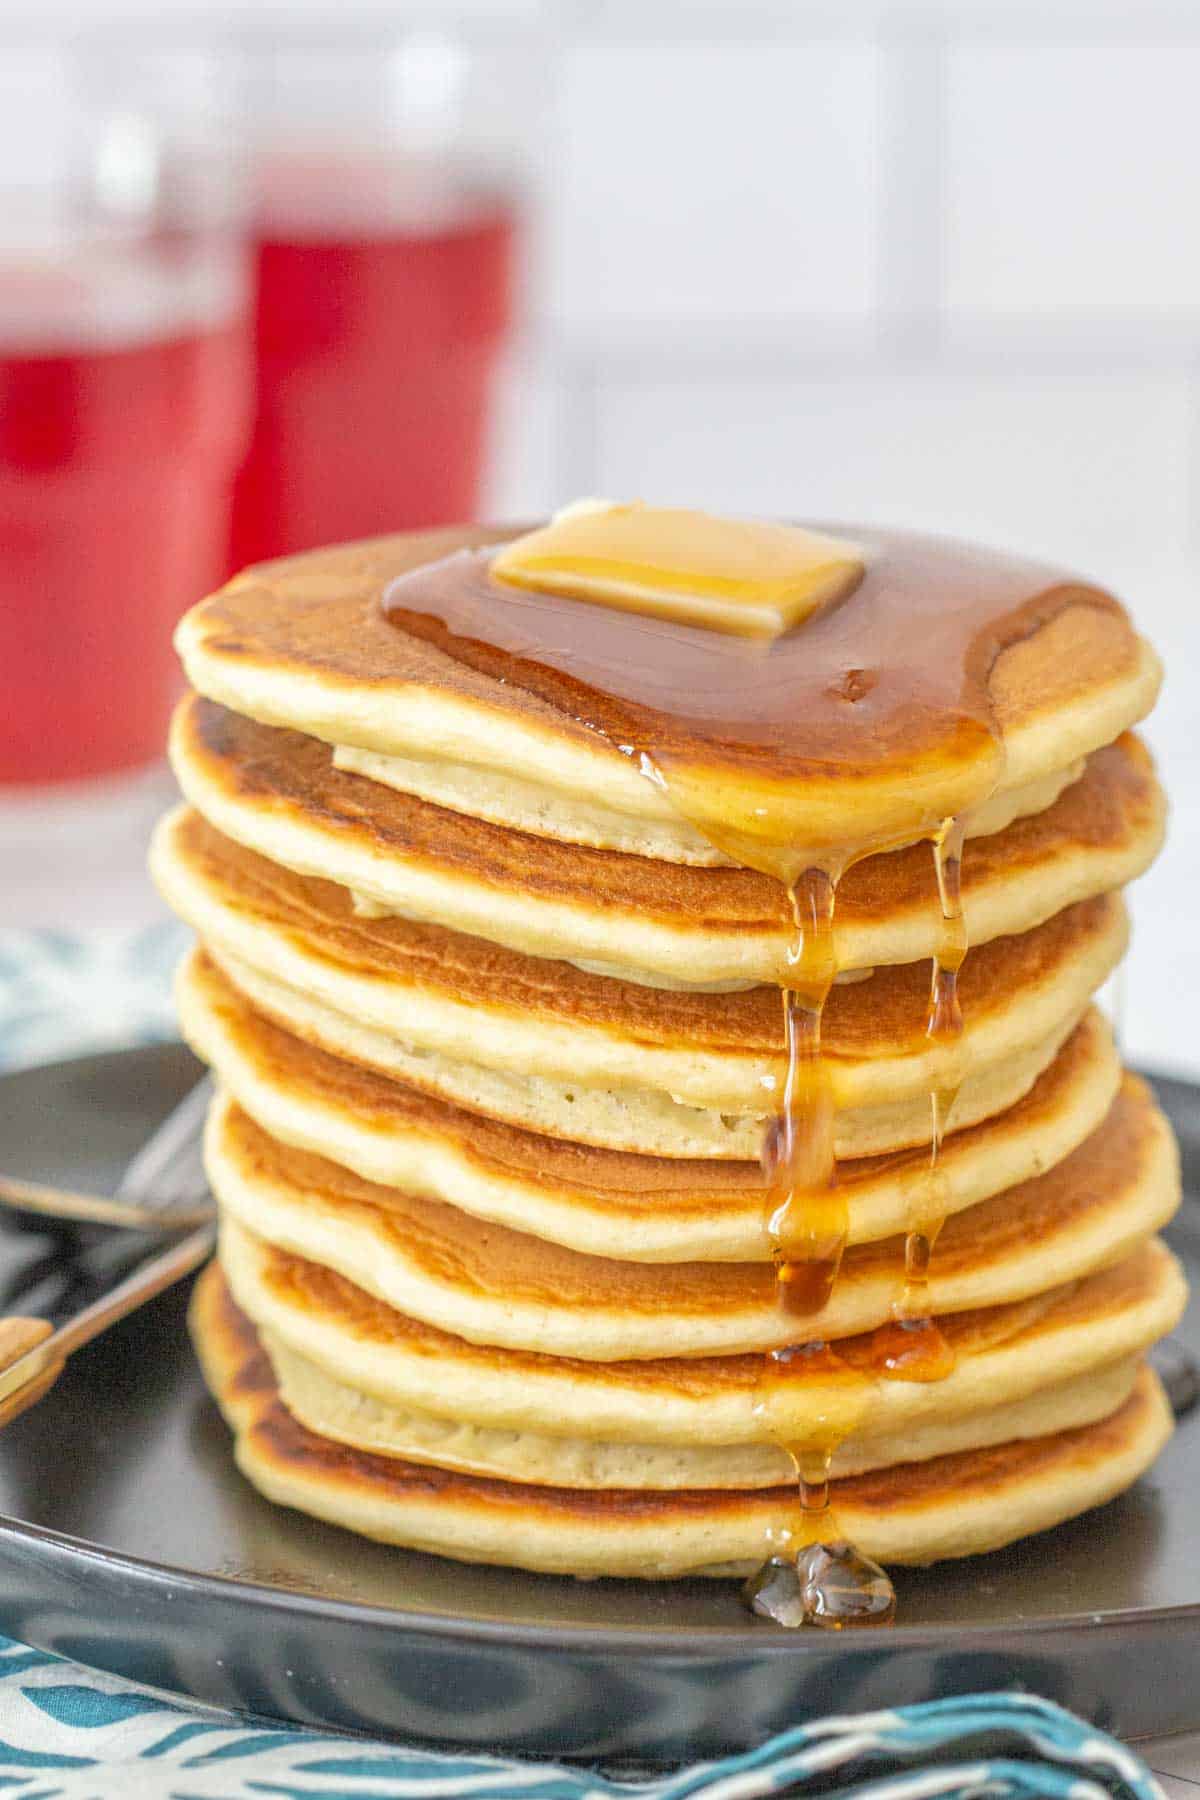 applesauce pancakes with syrup dripping